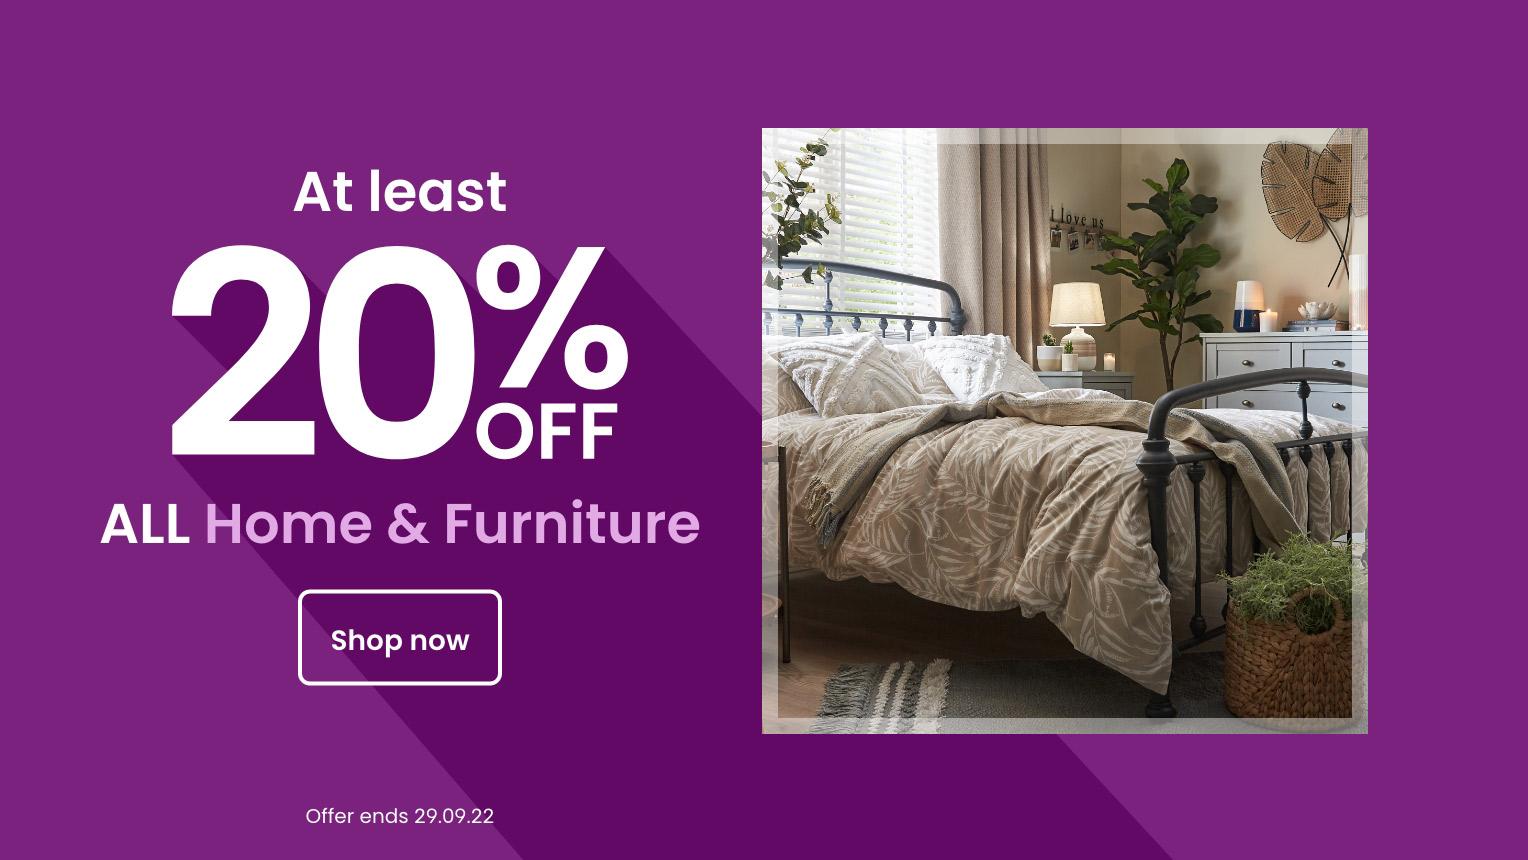 At least 20% off all Home & Furniture